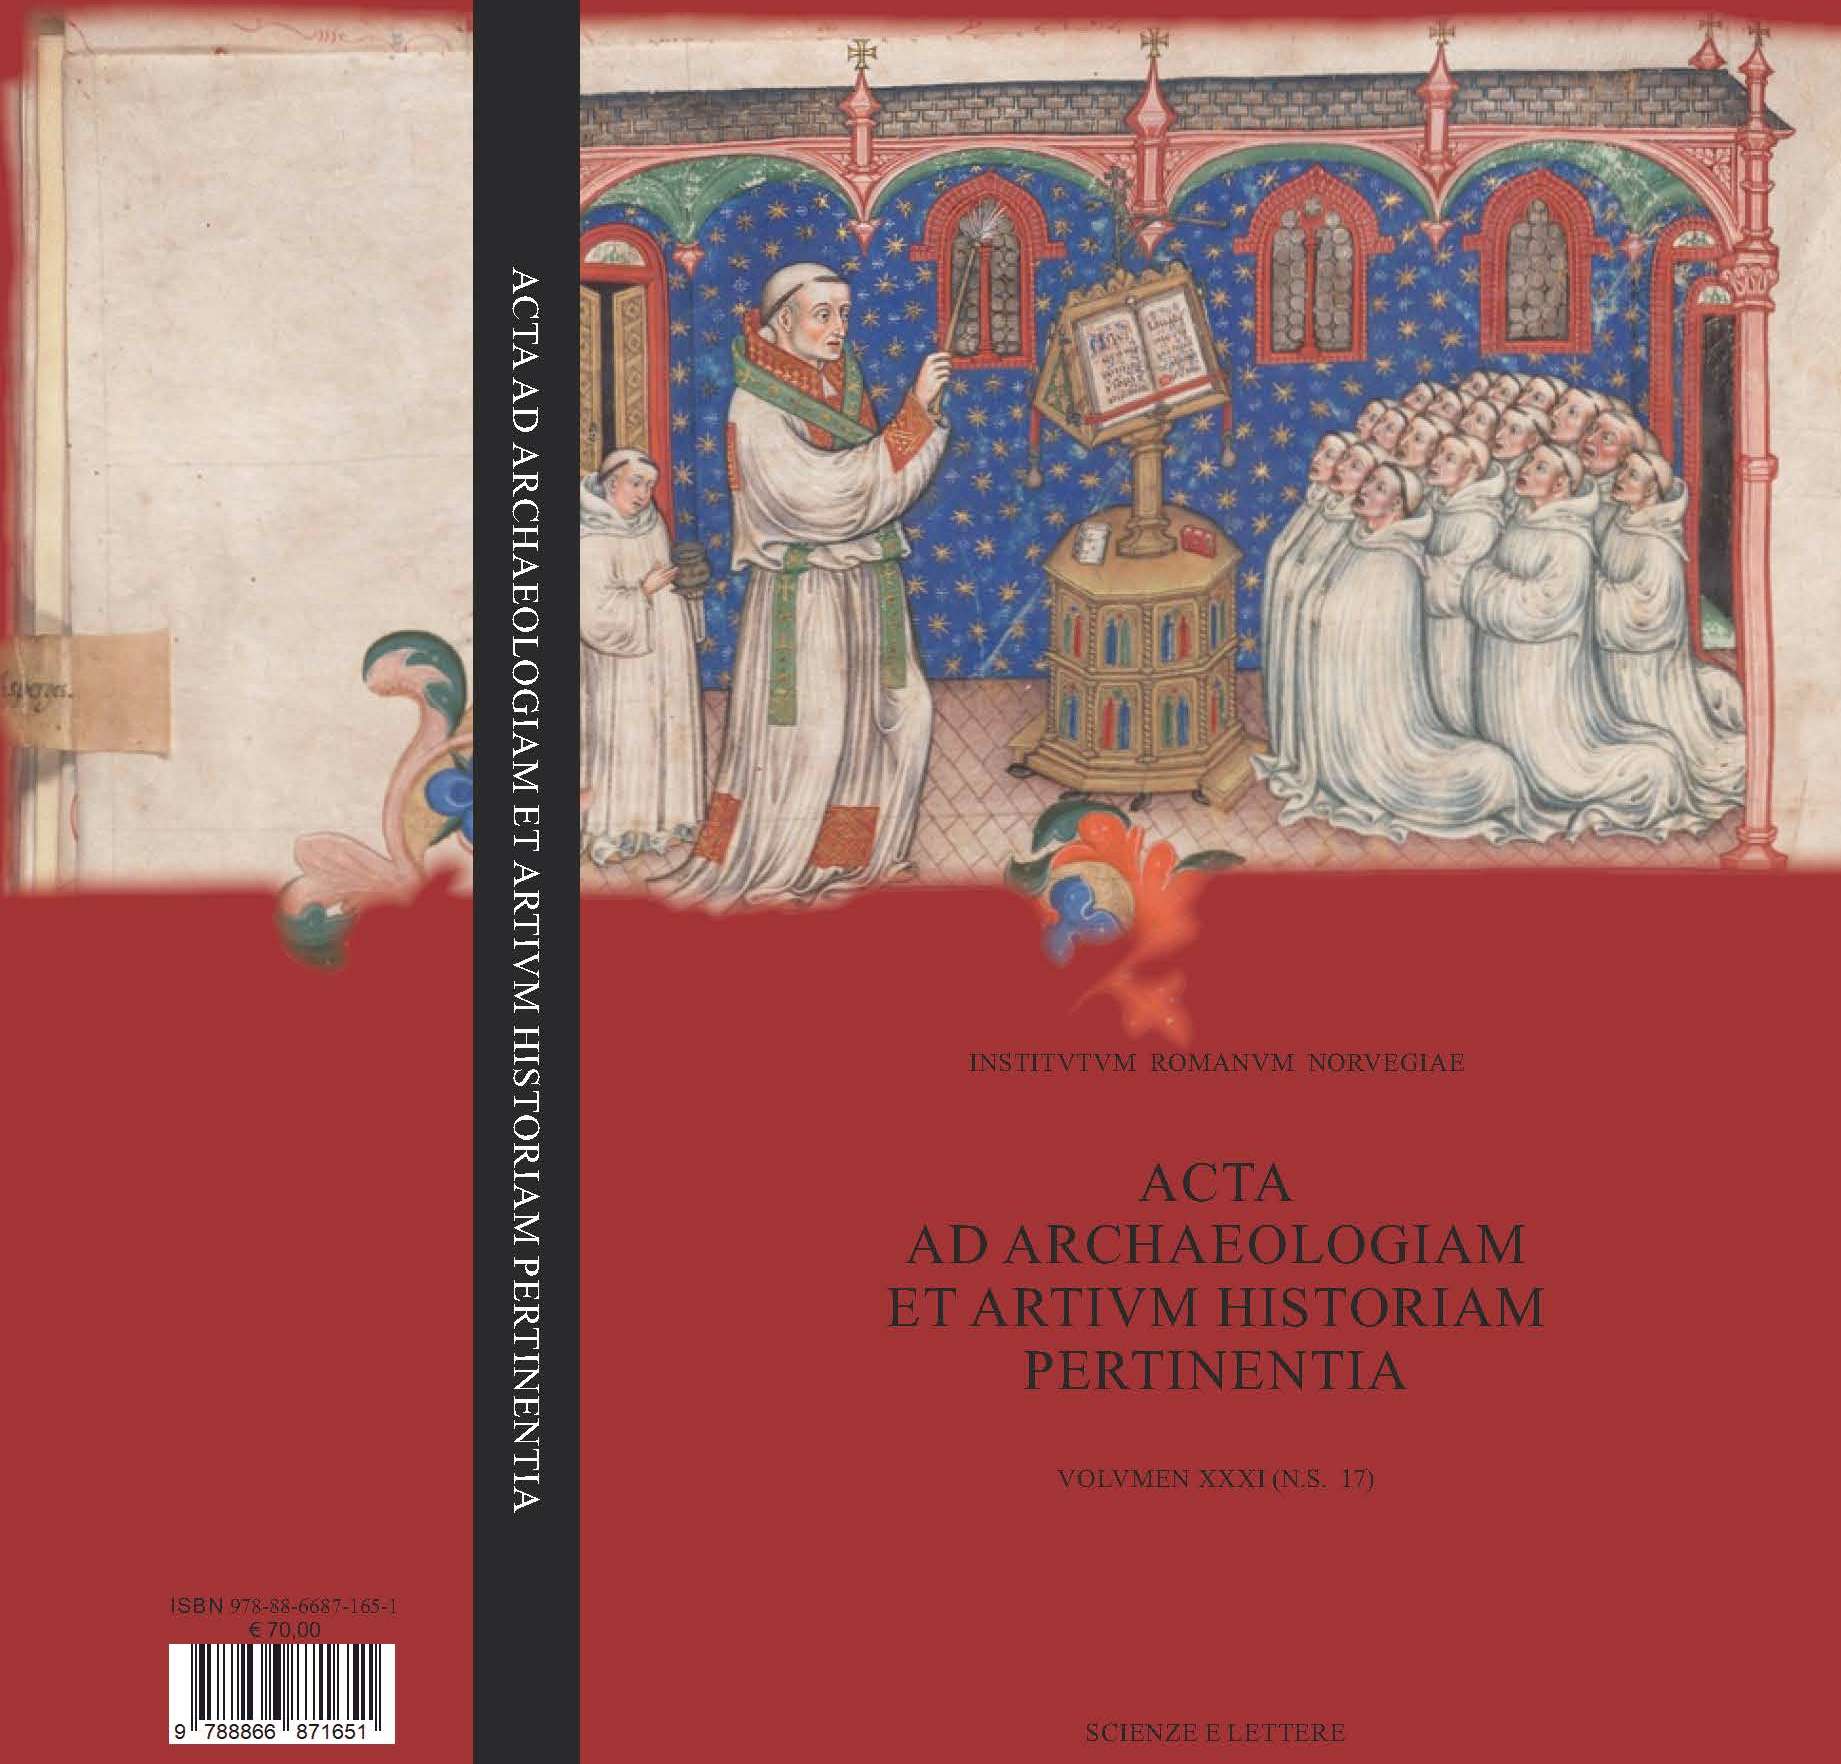 Acta ad Archaeologiam et Artivm Historiam Pertinentia - Volvmen XXXI (n.s. 17) <br/>
Tools for Transformation. 
Liturgy and Religious Practice in Late Antique Rome and Medieval Europe
 